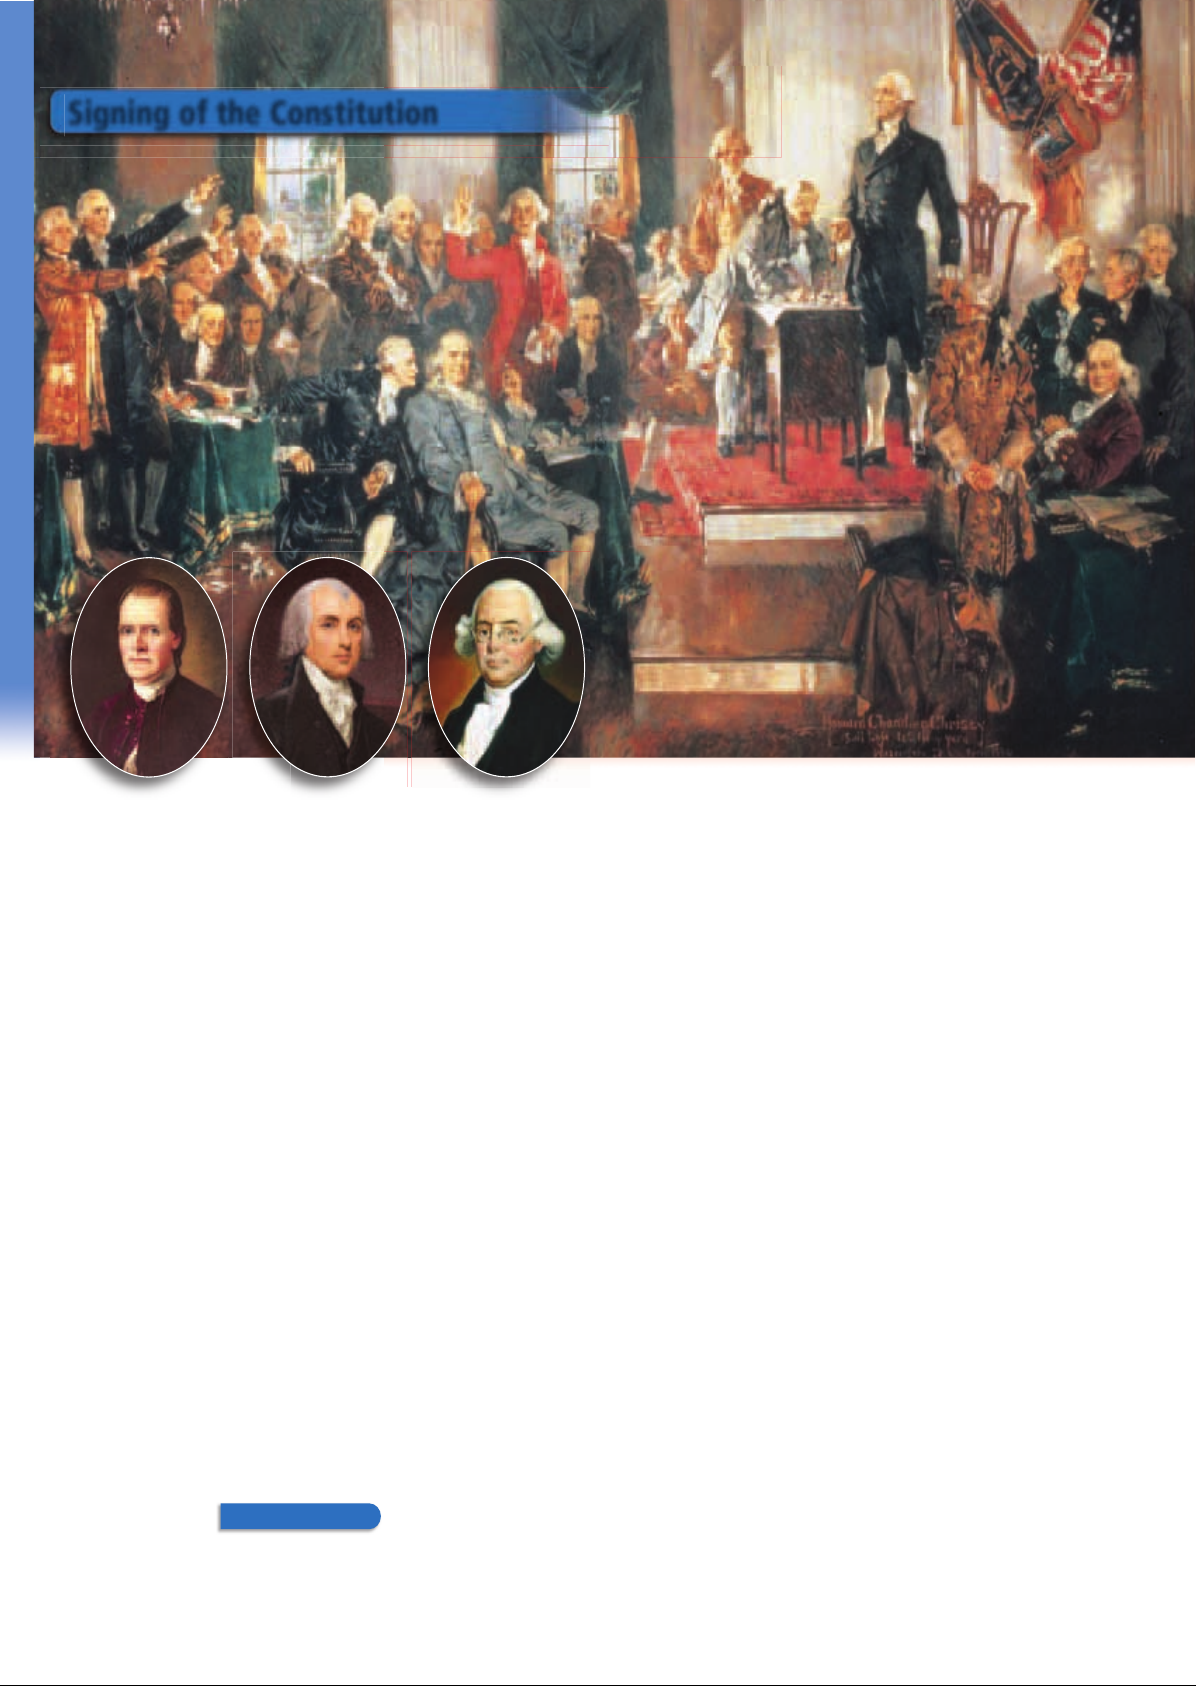 US_History_Textbook_8th_Grade_Chapter_4_Forming_a_Government Image-14